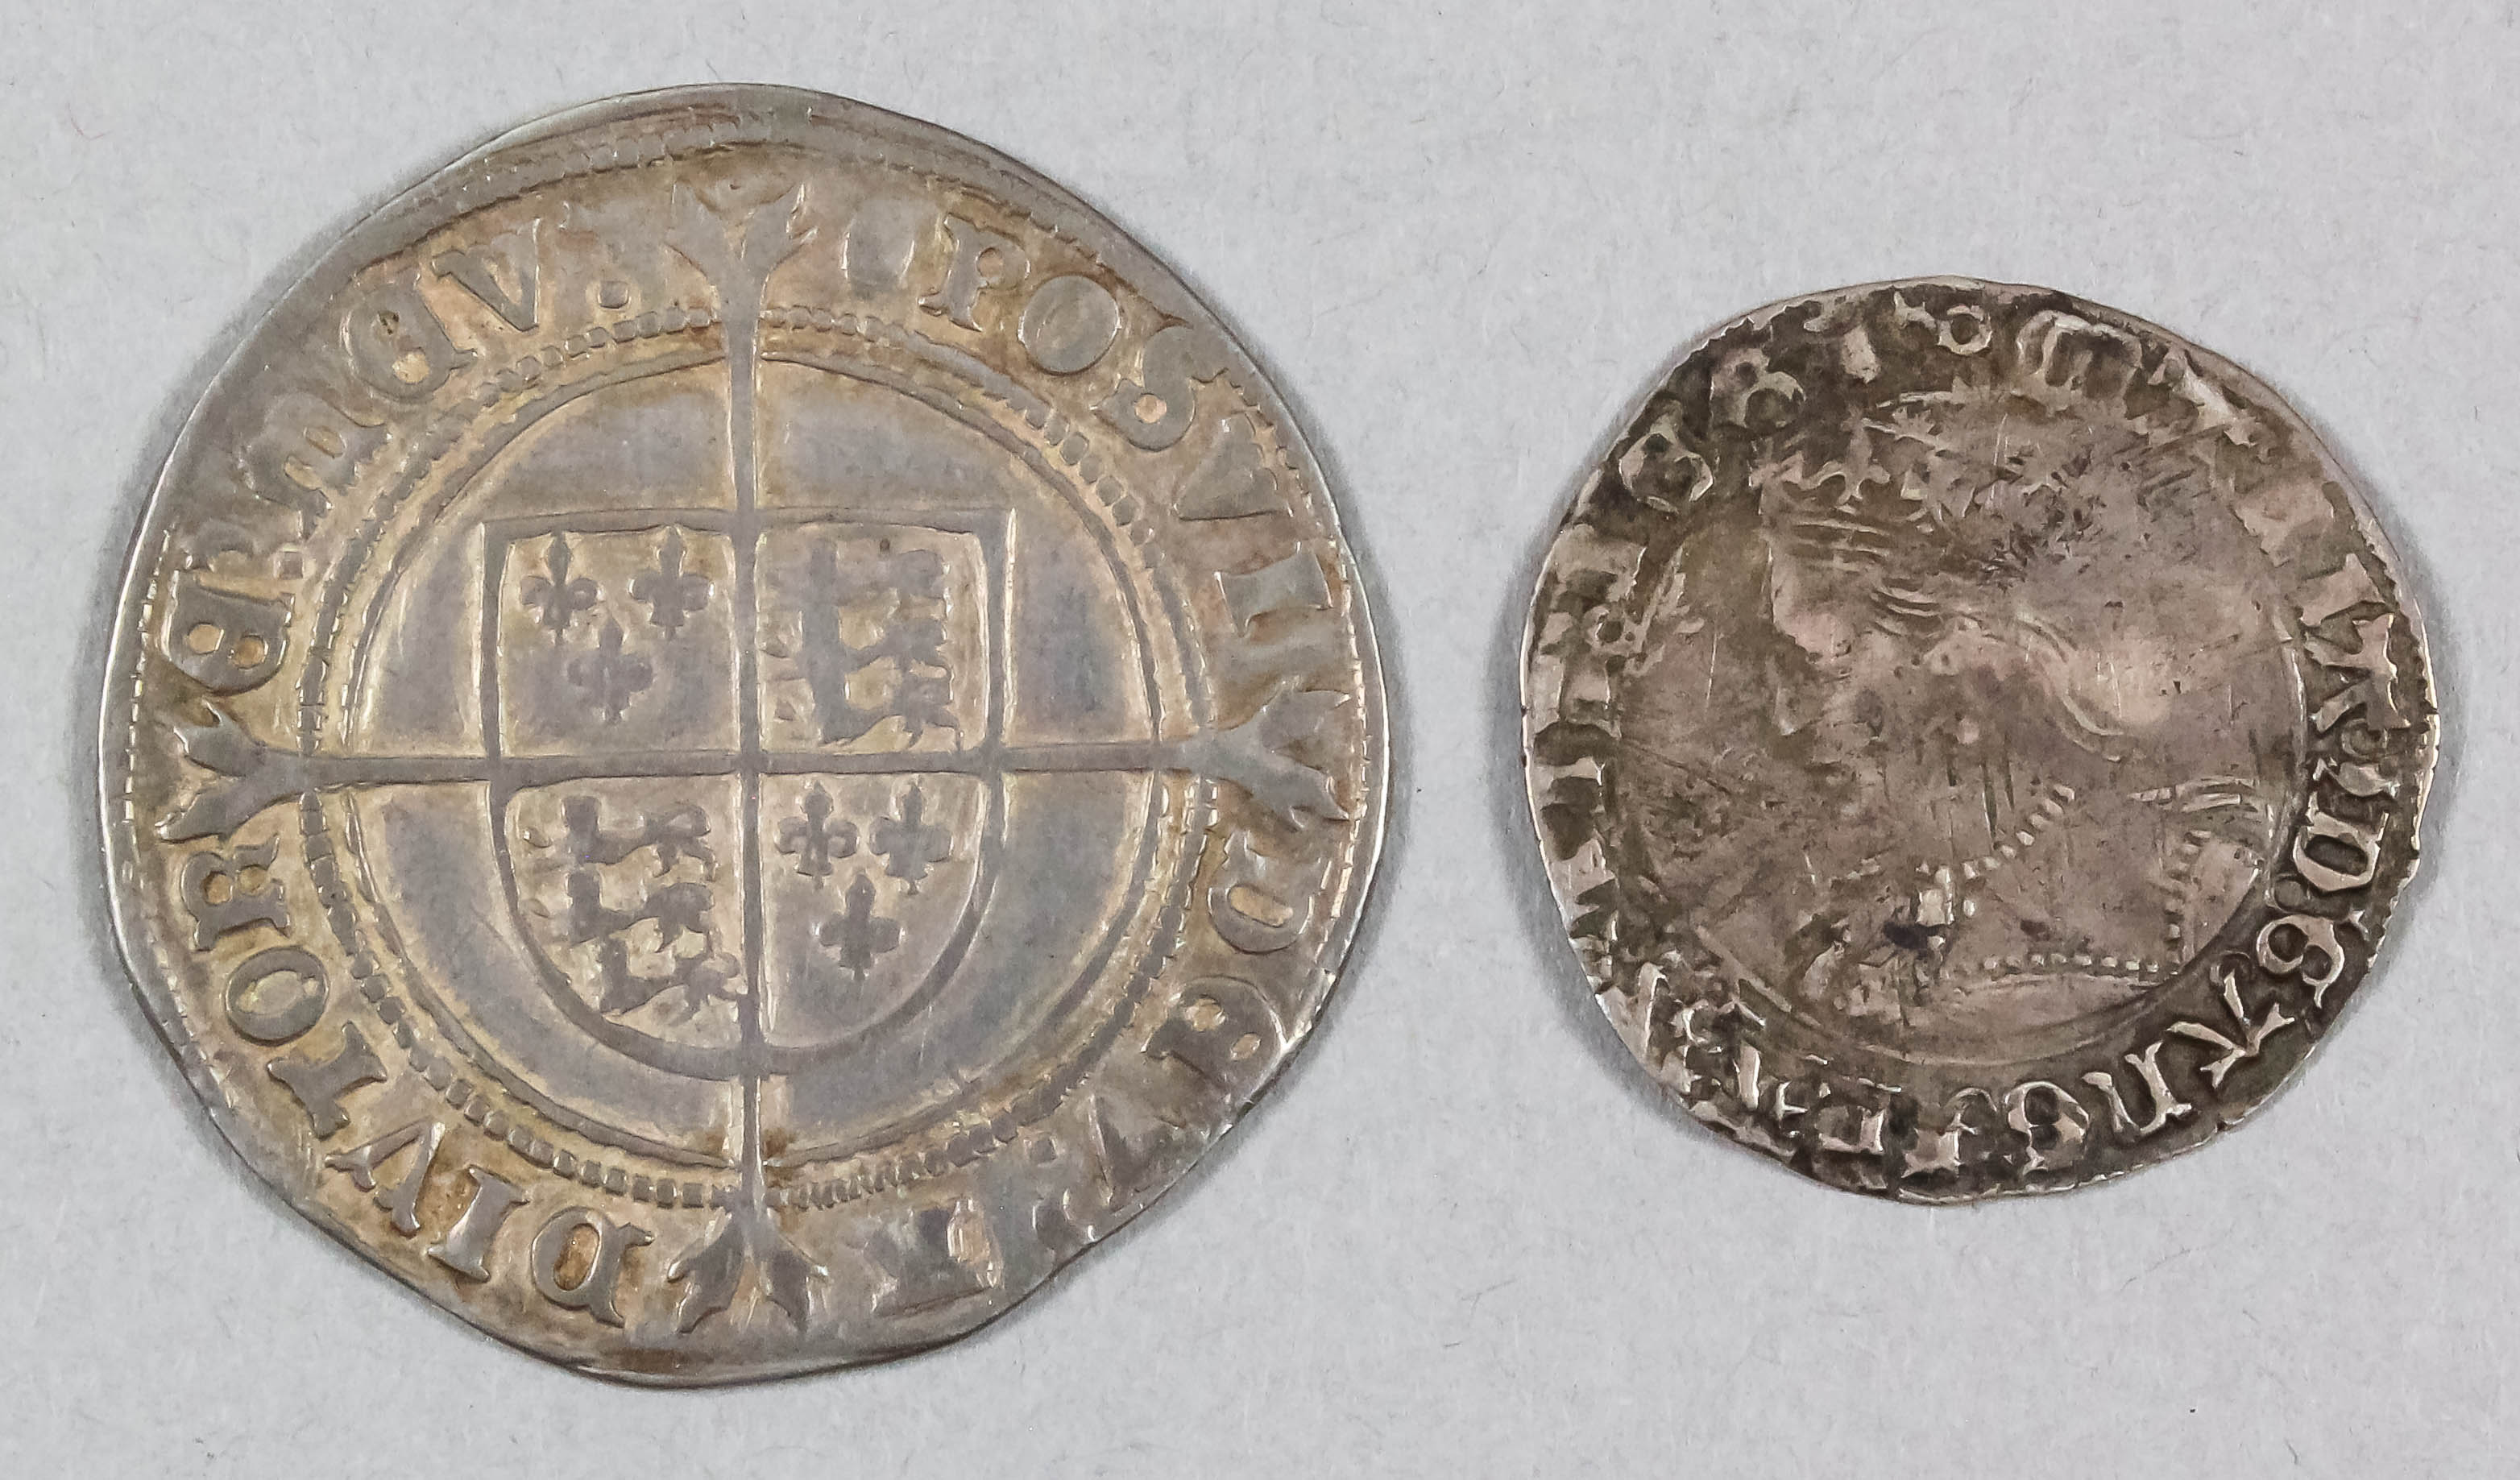 An Edward VI (1547-1553) hammered silver shilling, 32mm diameter (weight 6.2 grammes), and a Queen